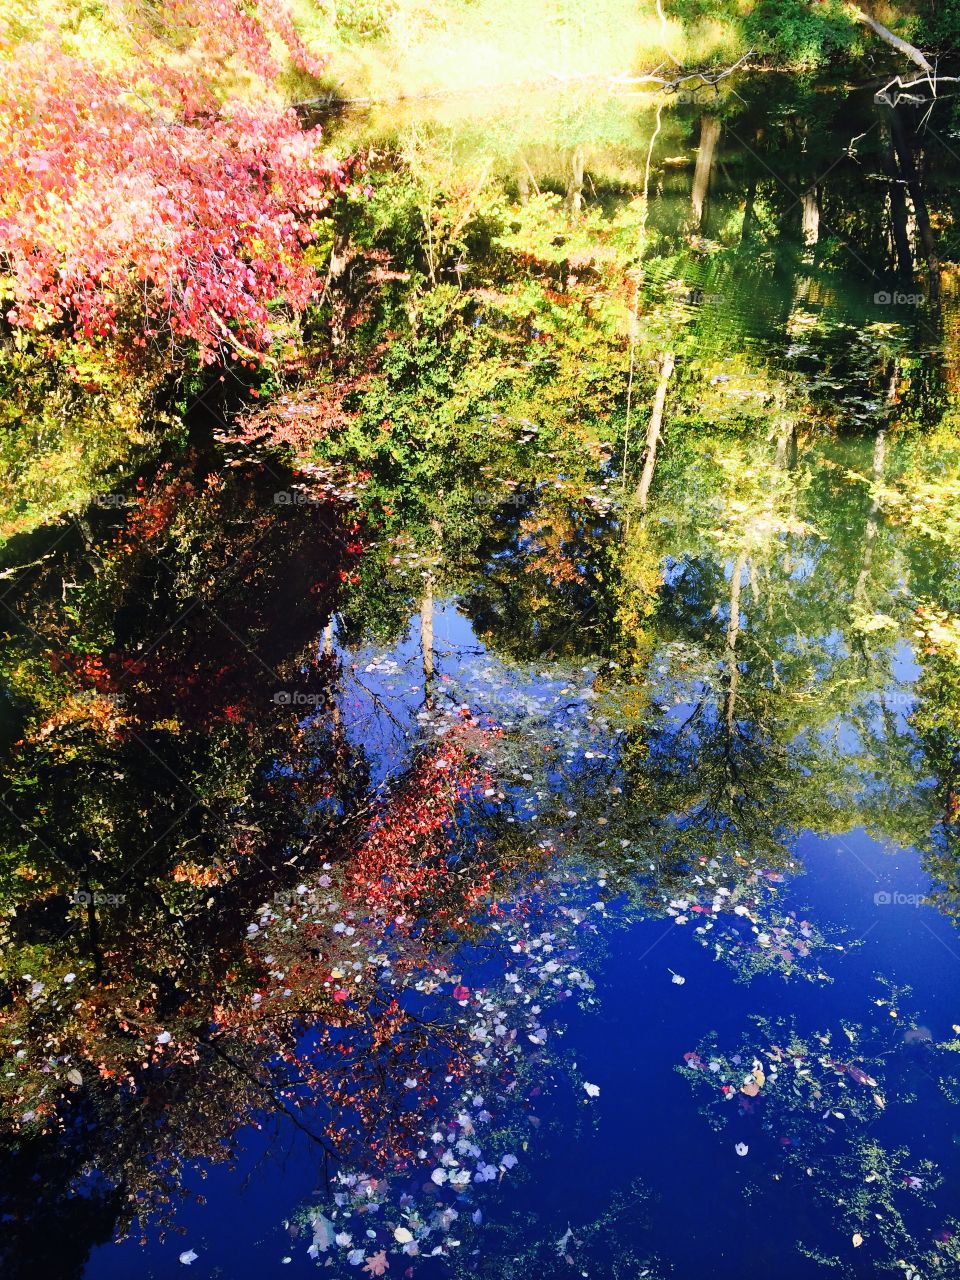 Colorful falls leaves & a pond. Colorful fall leaves have fallen on the top of a deep blue pond